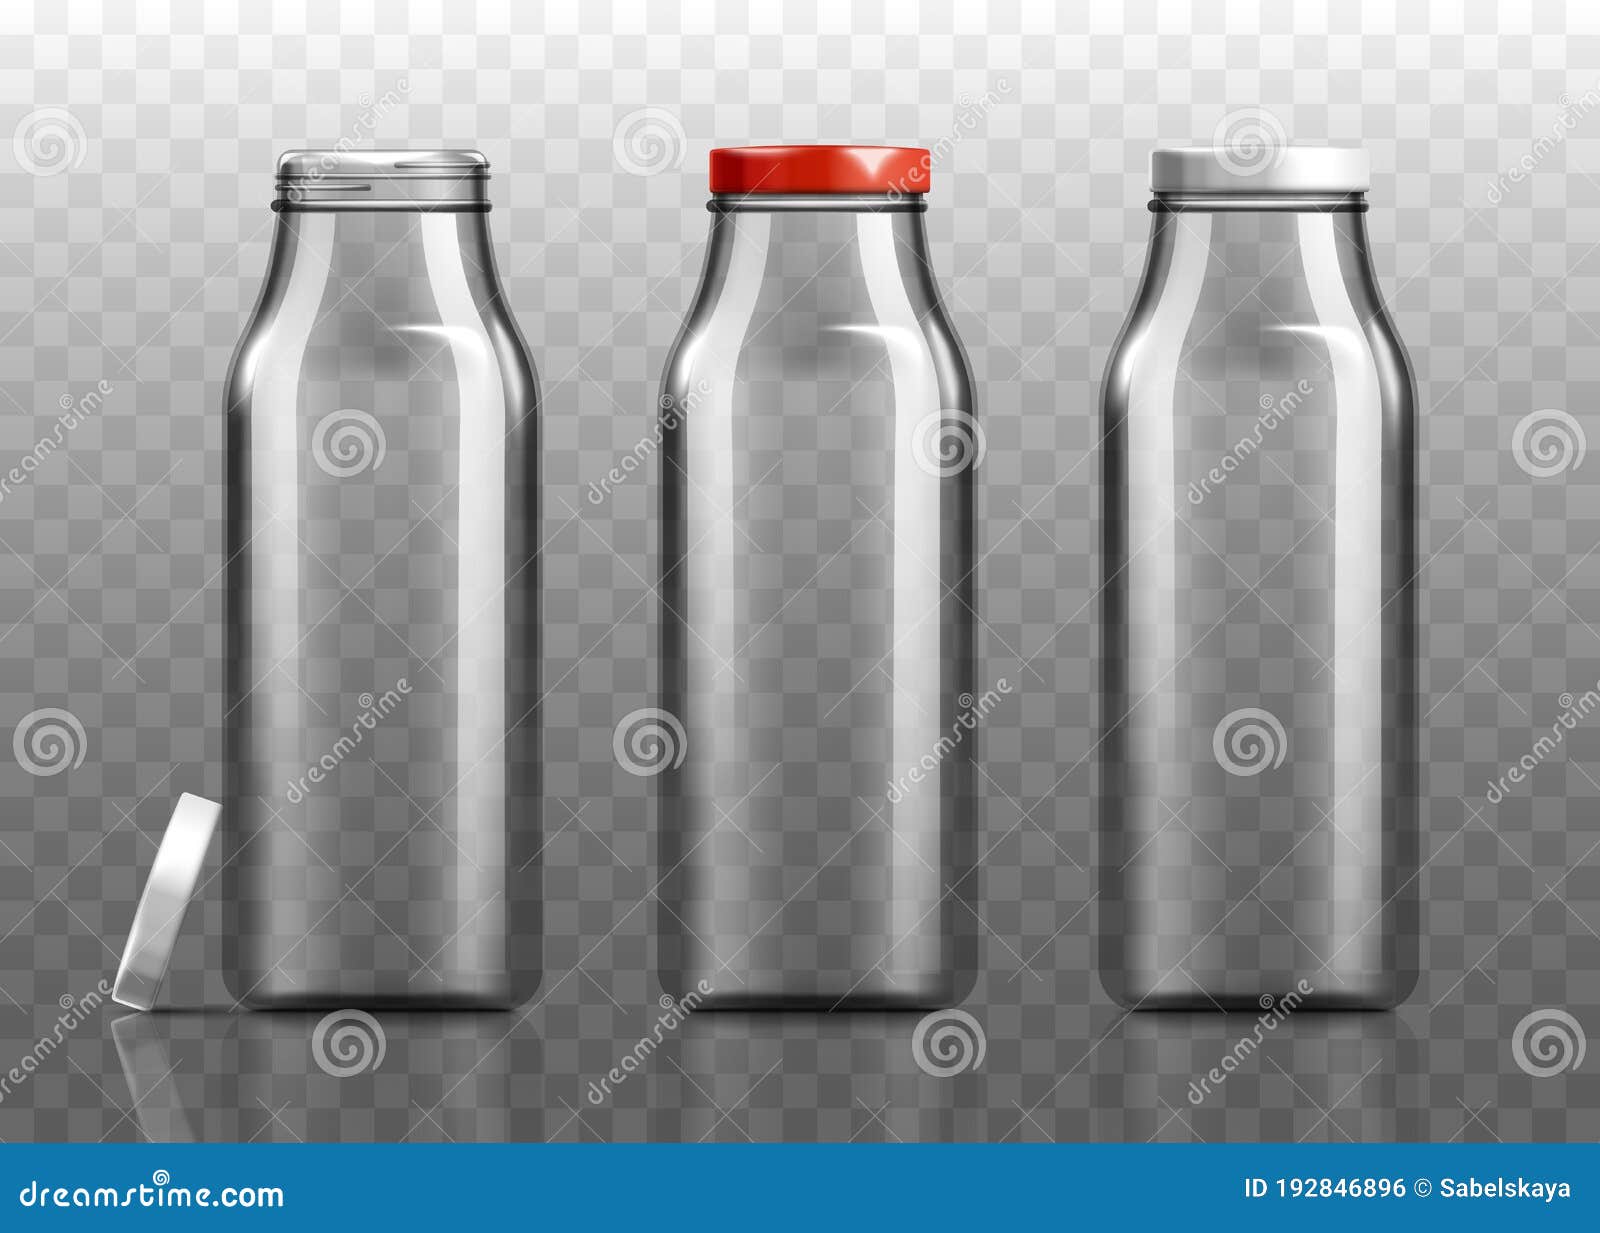 Download Realistic Empty Milk Bottle Mockup Set Isolated On Transparent Background Stock Vector Illustration Of Design Icon 192846896